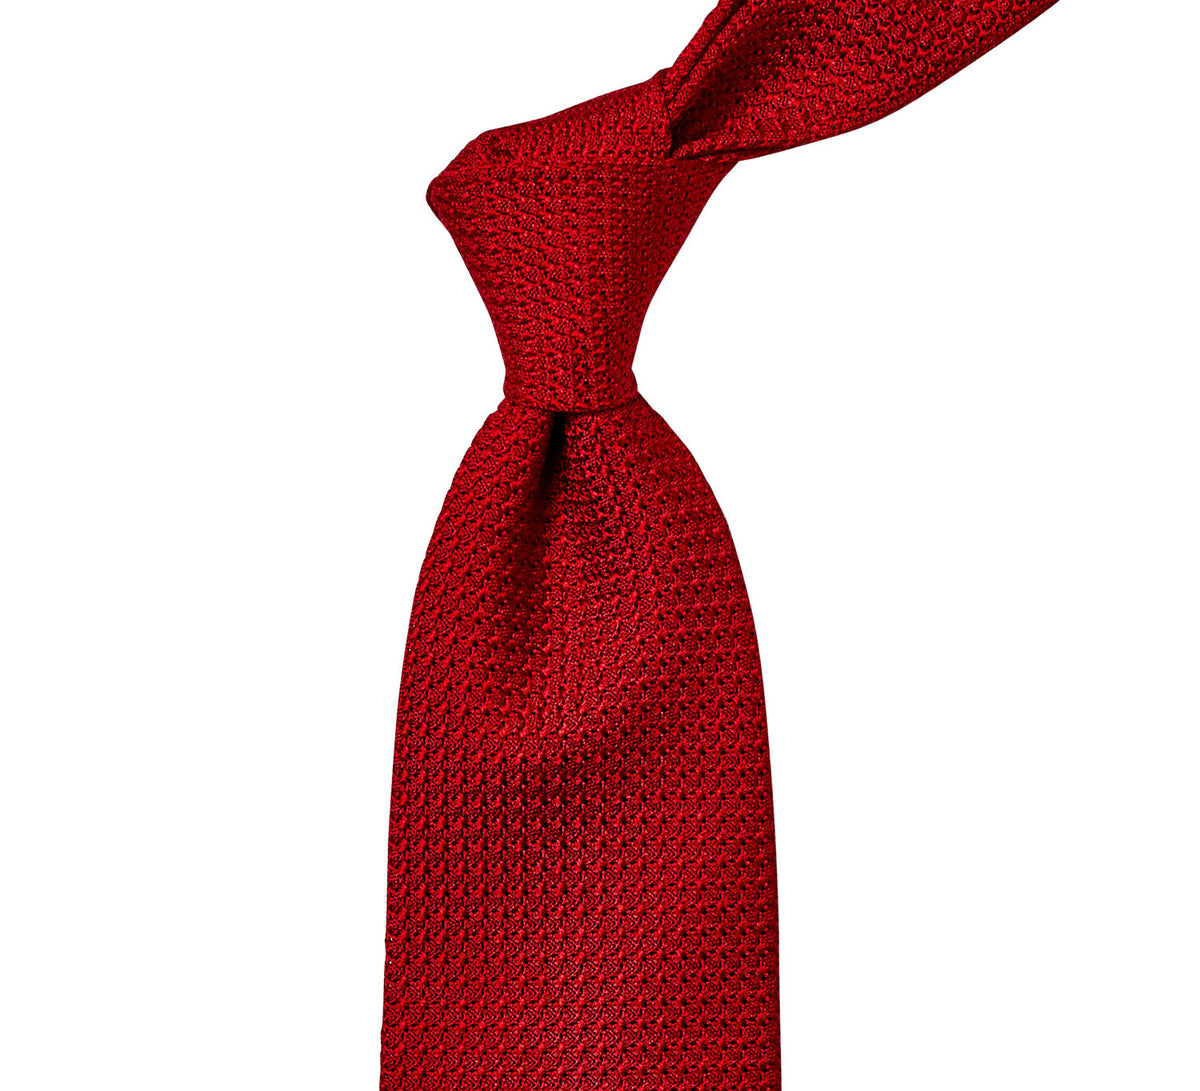 A handmade Sovereign Grade Grenadine Grossa Red Tie on a white background from KirbyAllison.com in the United Kingdom.